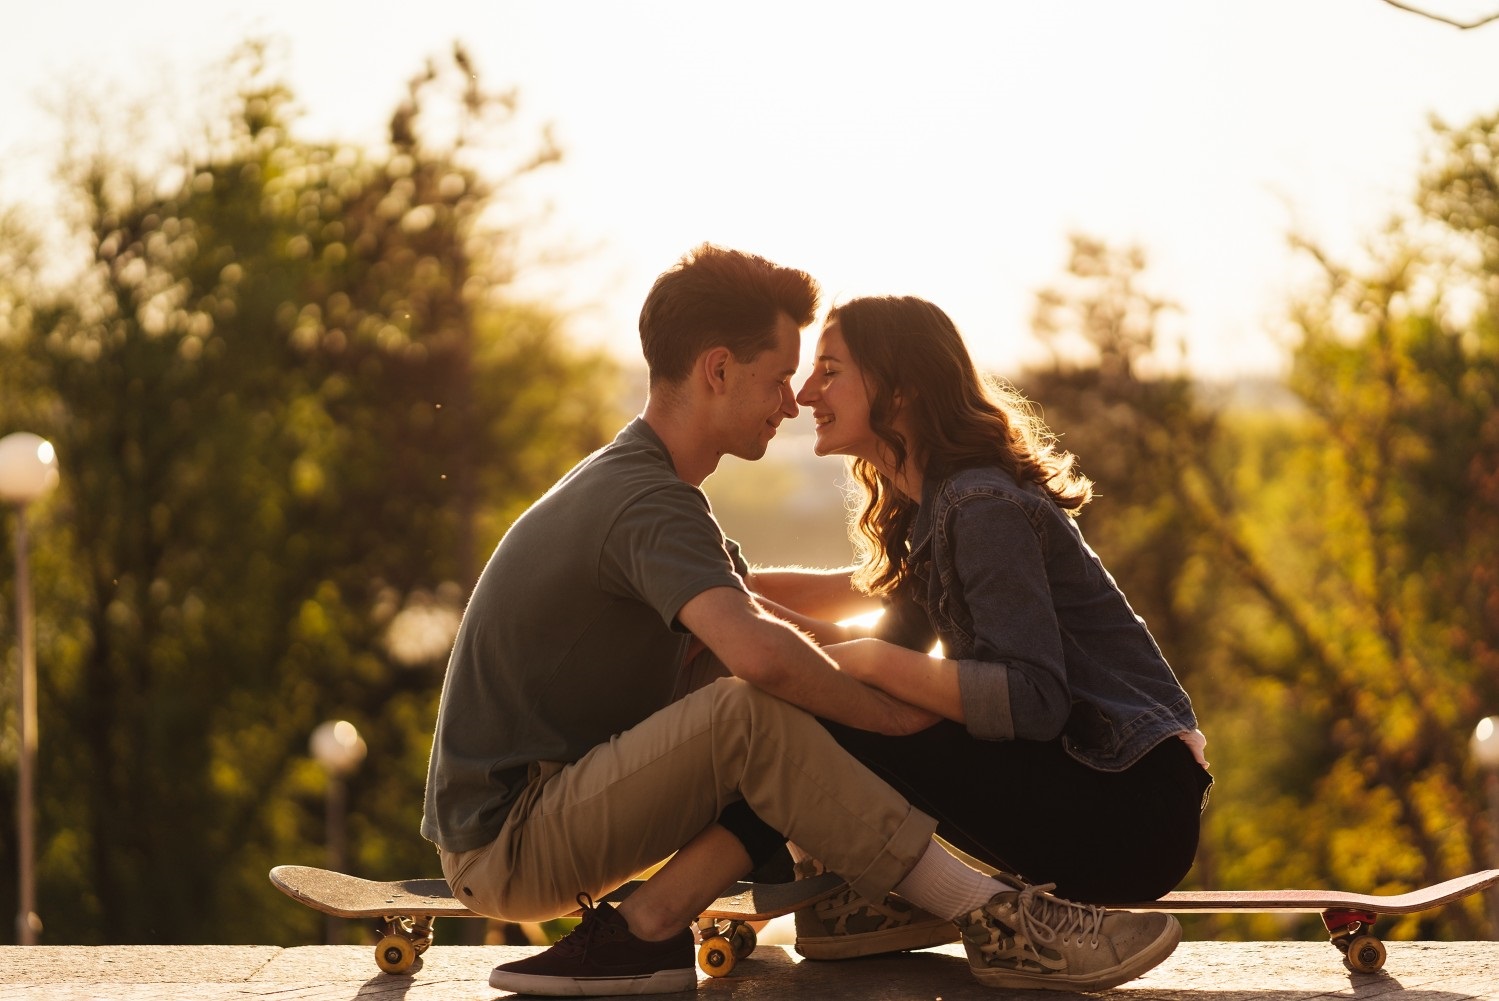 How To Build A Relationship The Right Way: 6 Essential Tips